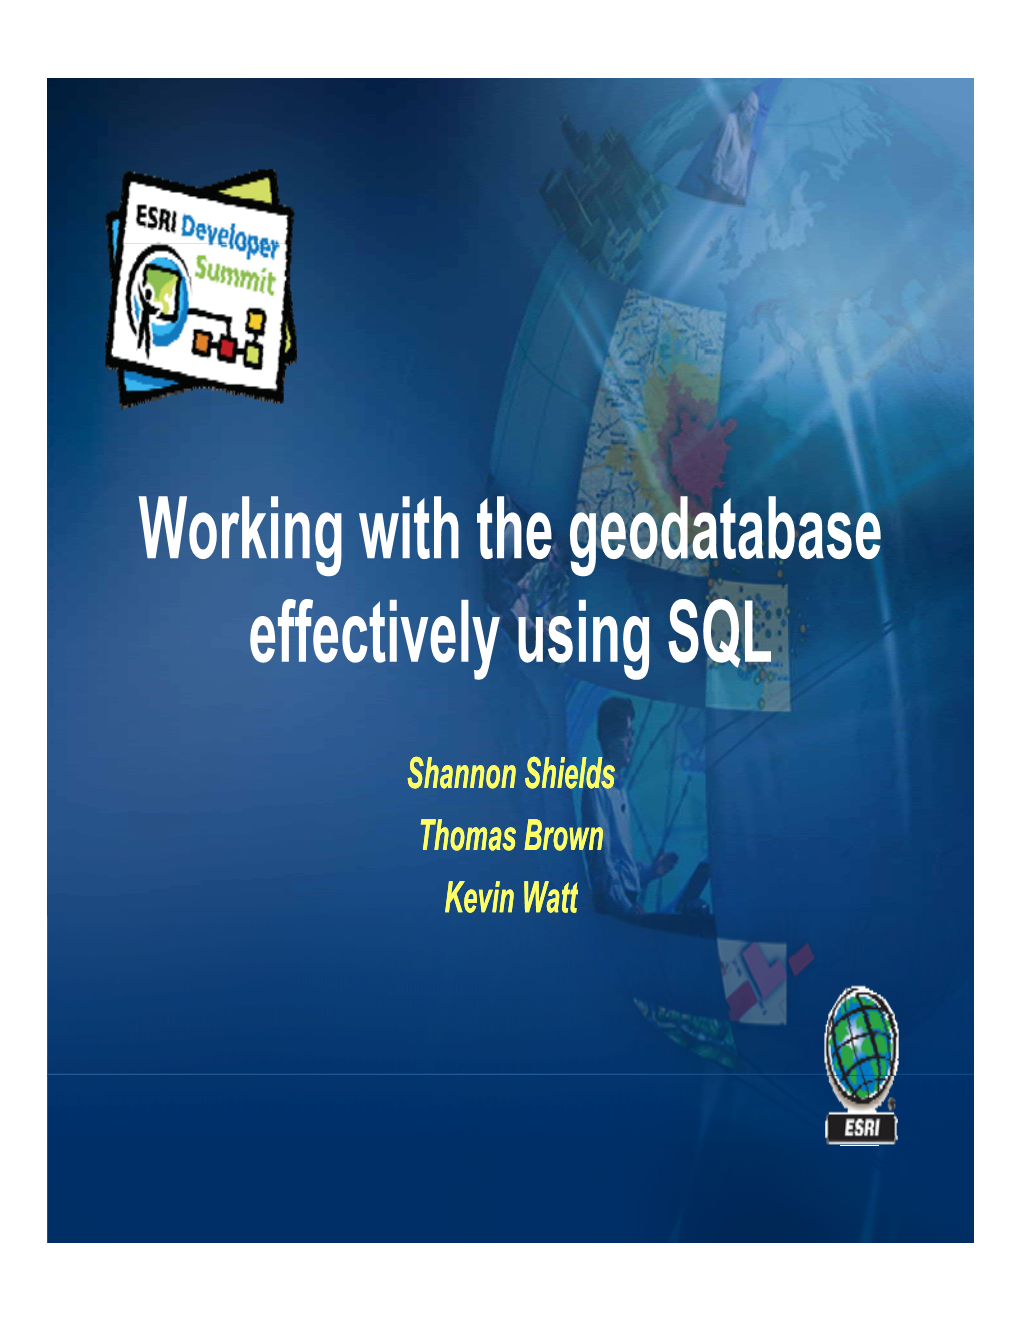 Working with the Geodatabase Effectively Using SQL